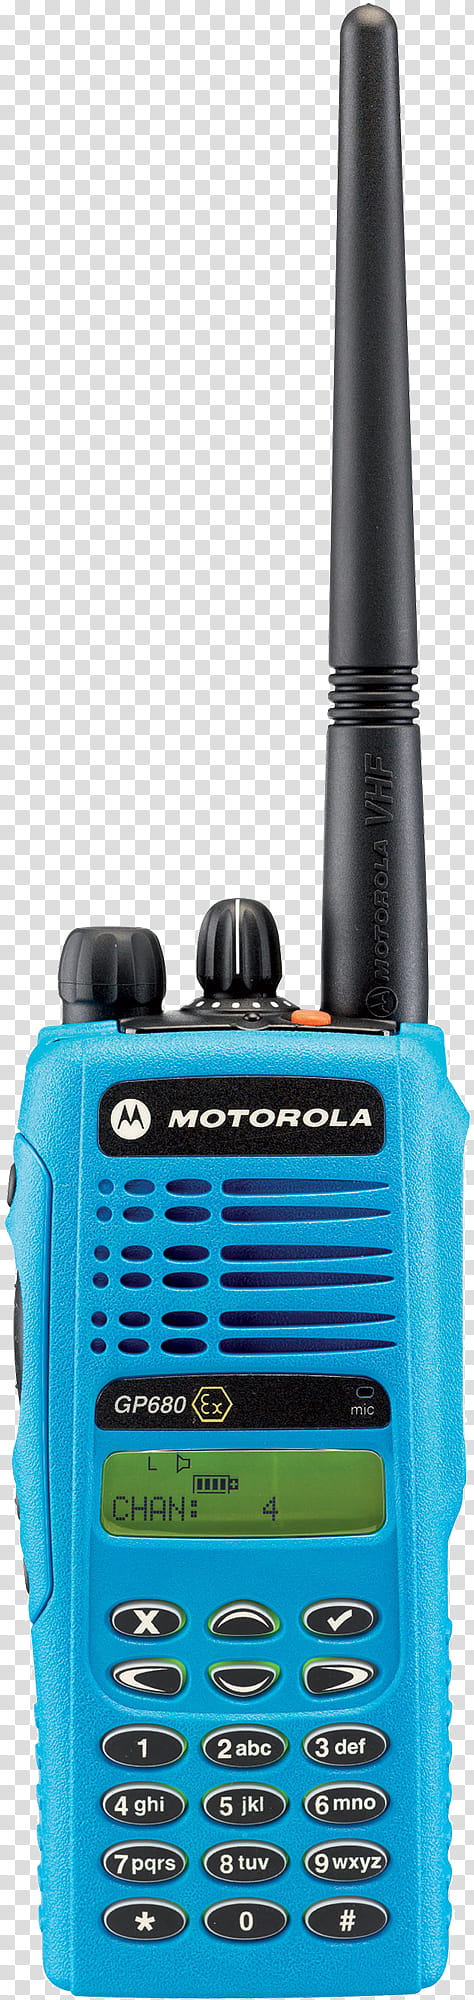 Radio, Twoway Radio, Handheld Twoway Radios, Very High Frequency, Ultra High Frequency, Mobile Phones, Project 25, Antenna transparent background PNG clipart